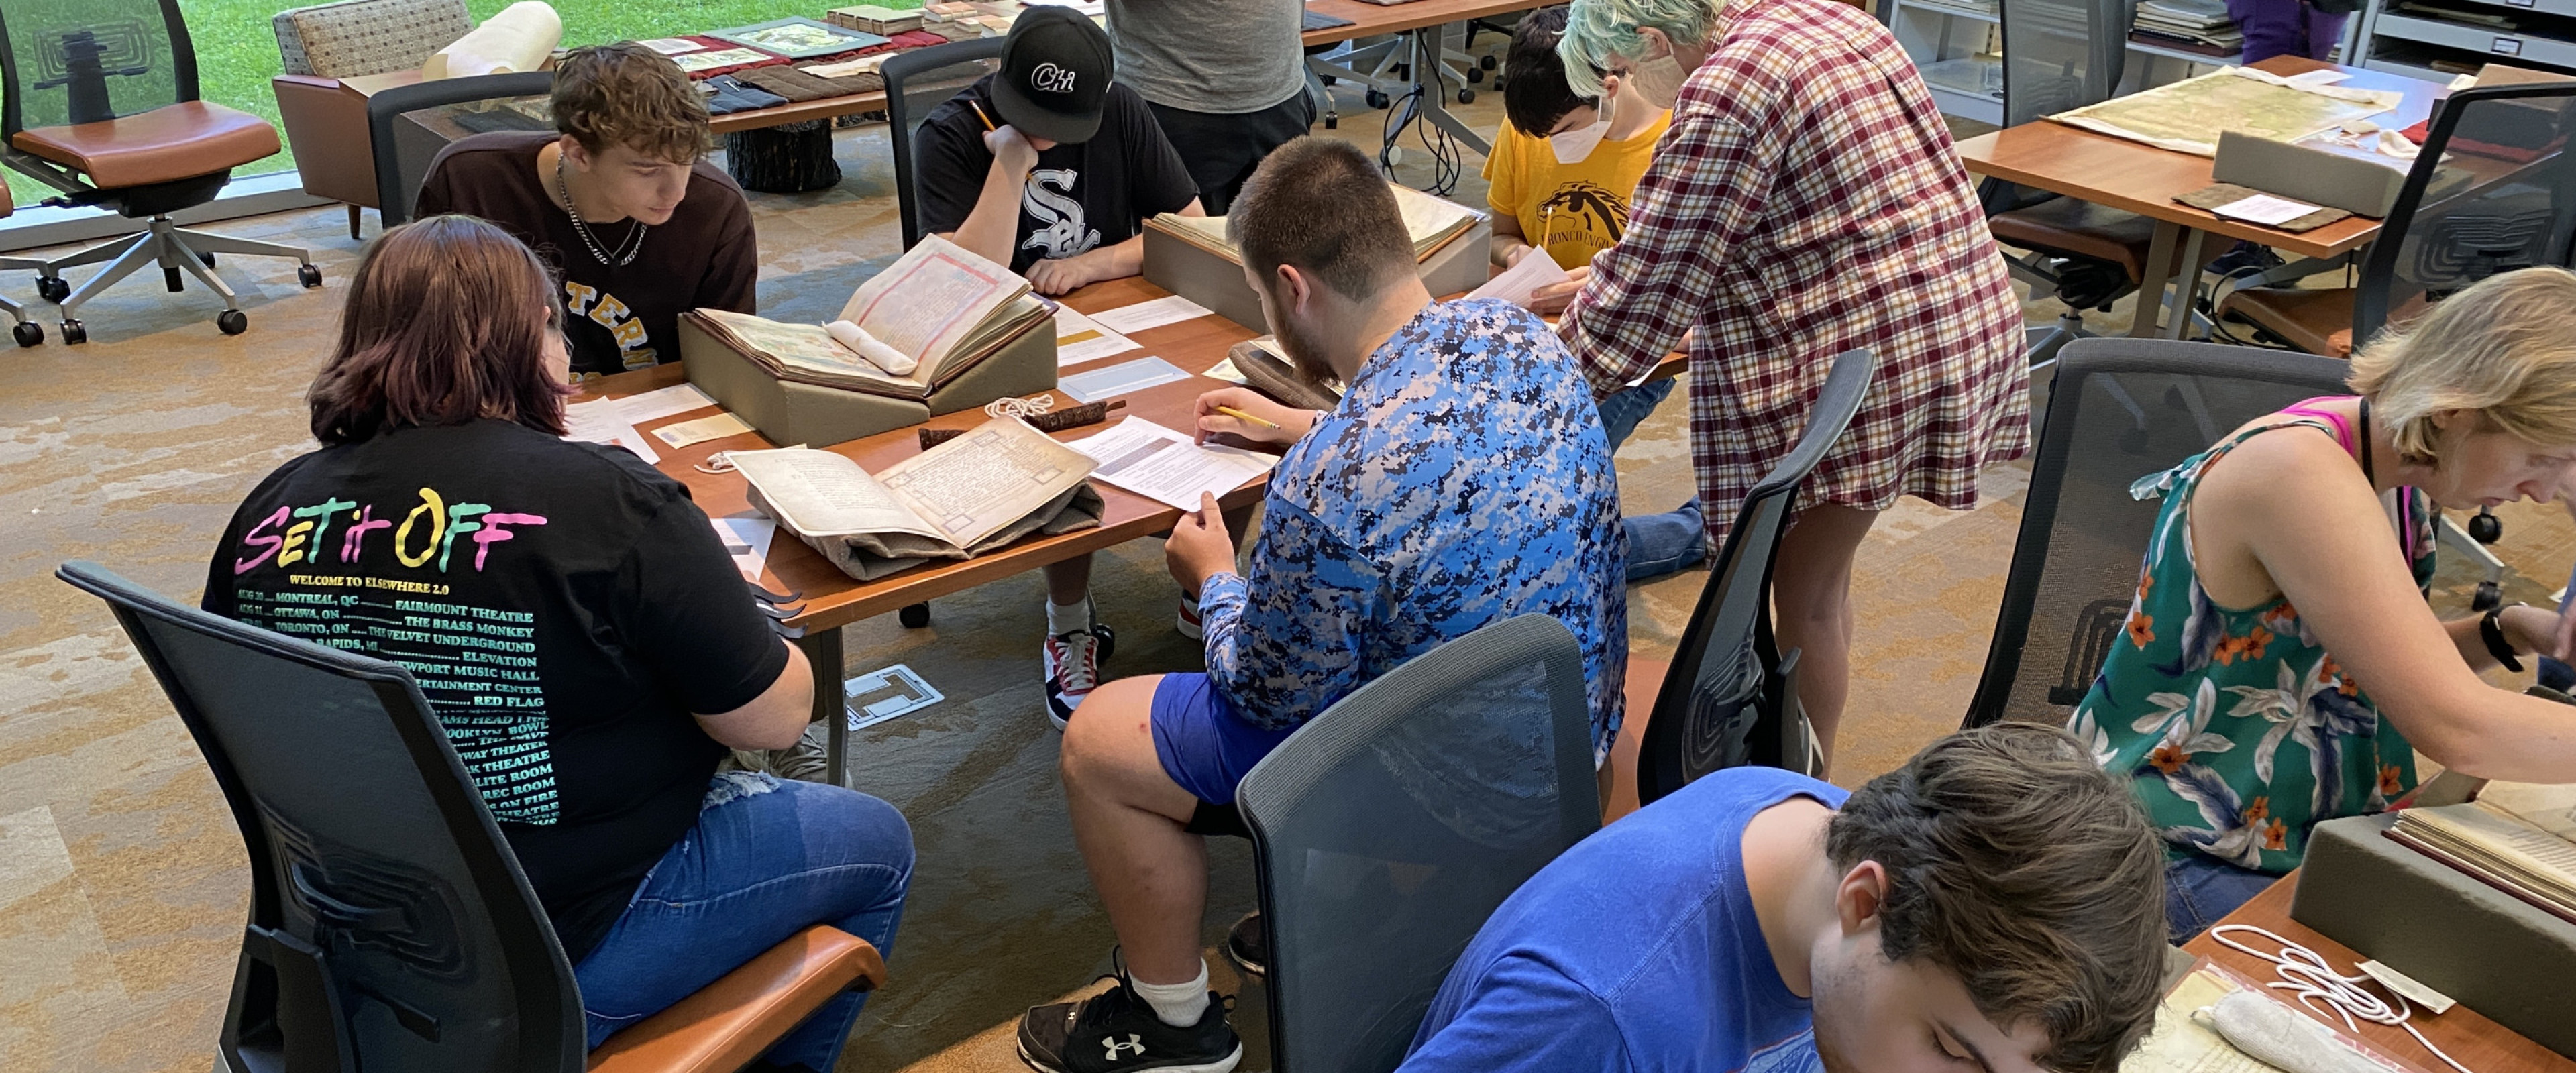 A group of undergraduate students sit and stand around tables, examining manuscripts and facsimiles